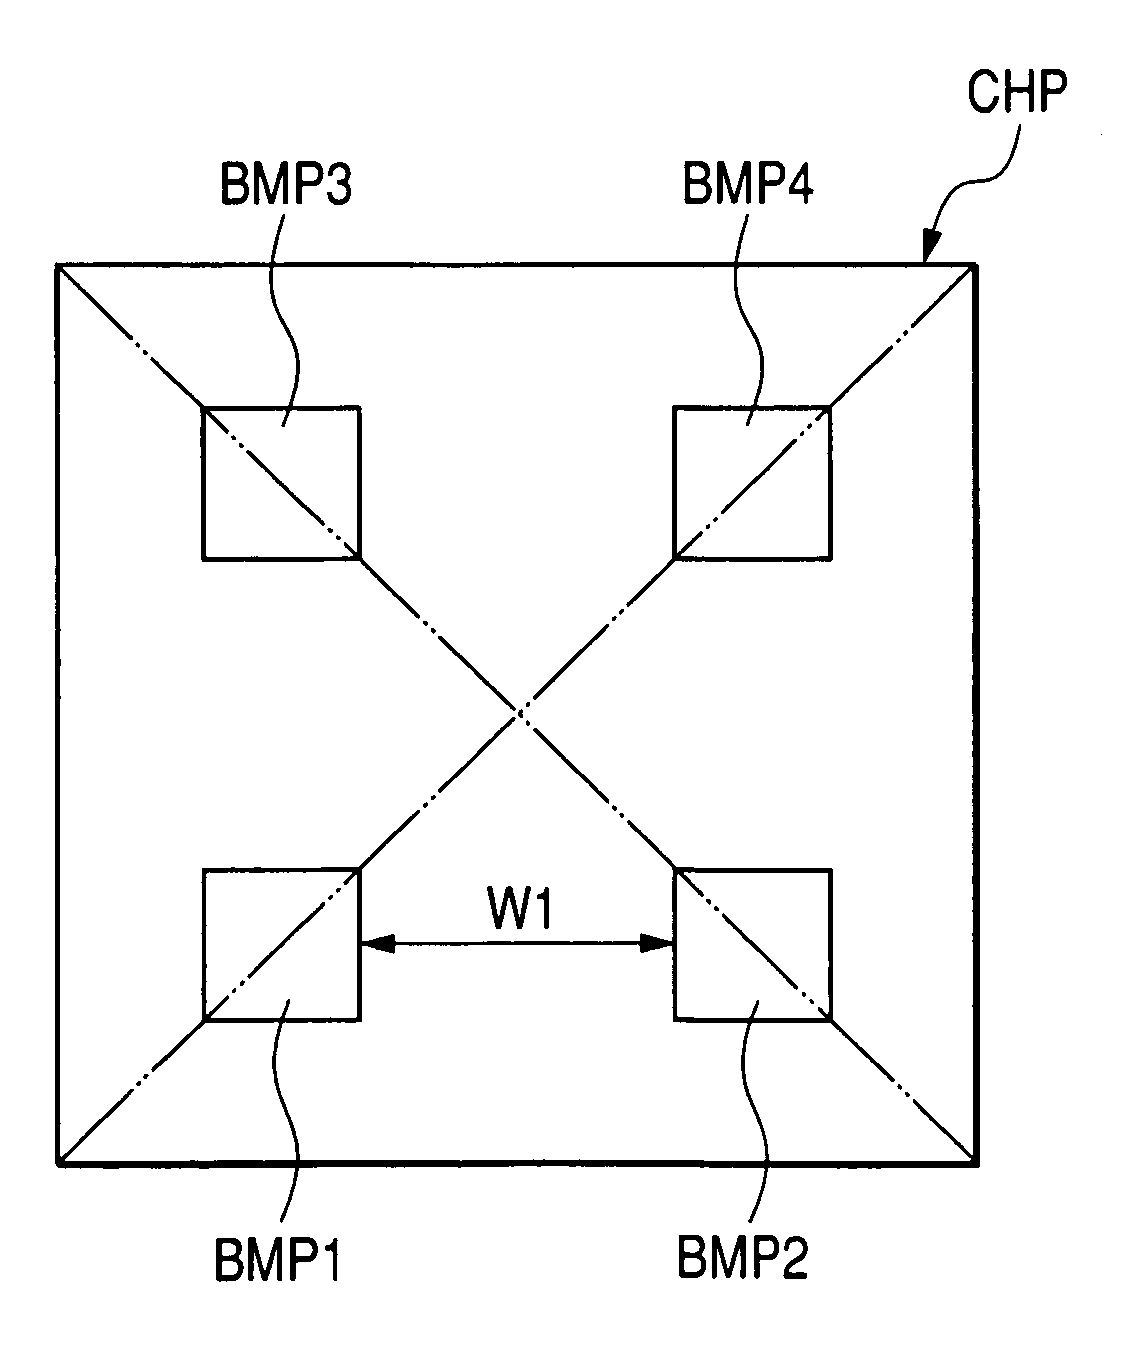 Method of manufacturing an inlet member for an electronic tag